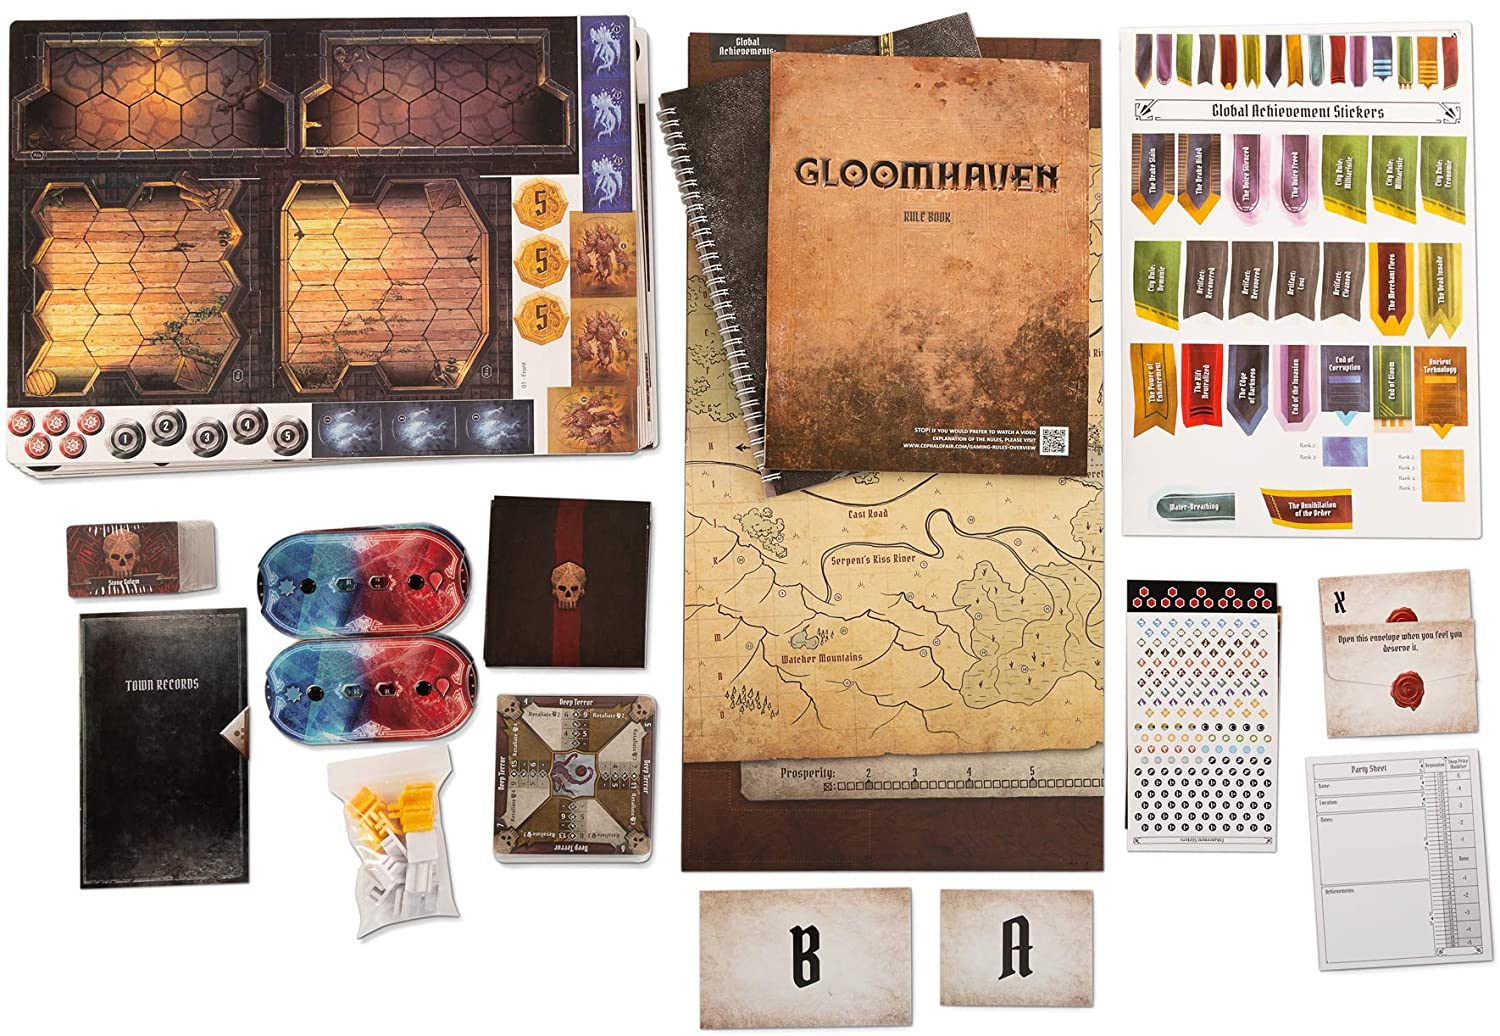 How to play Gloomhaven